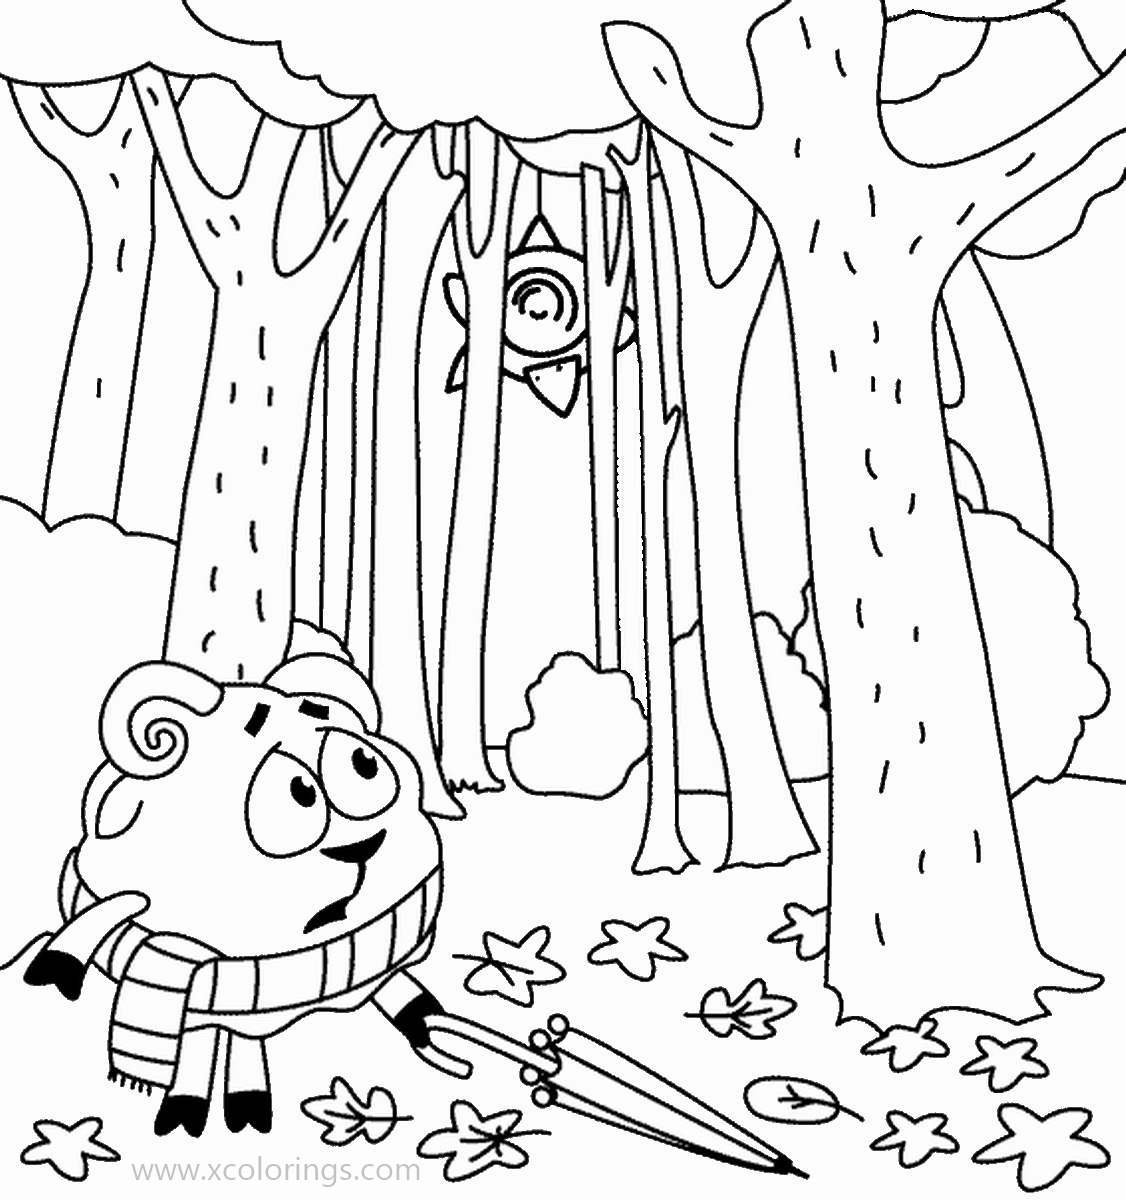 Free Kikoriki Coloring Pages Wally Lost in the Woods printable